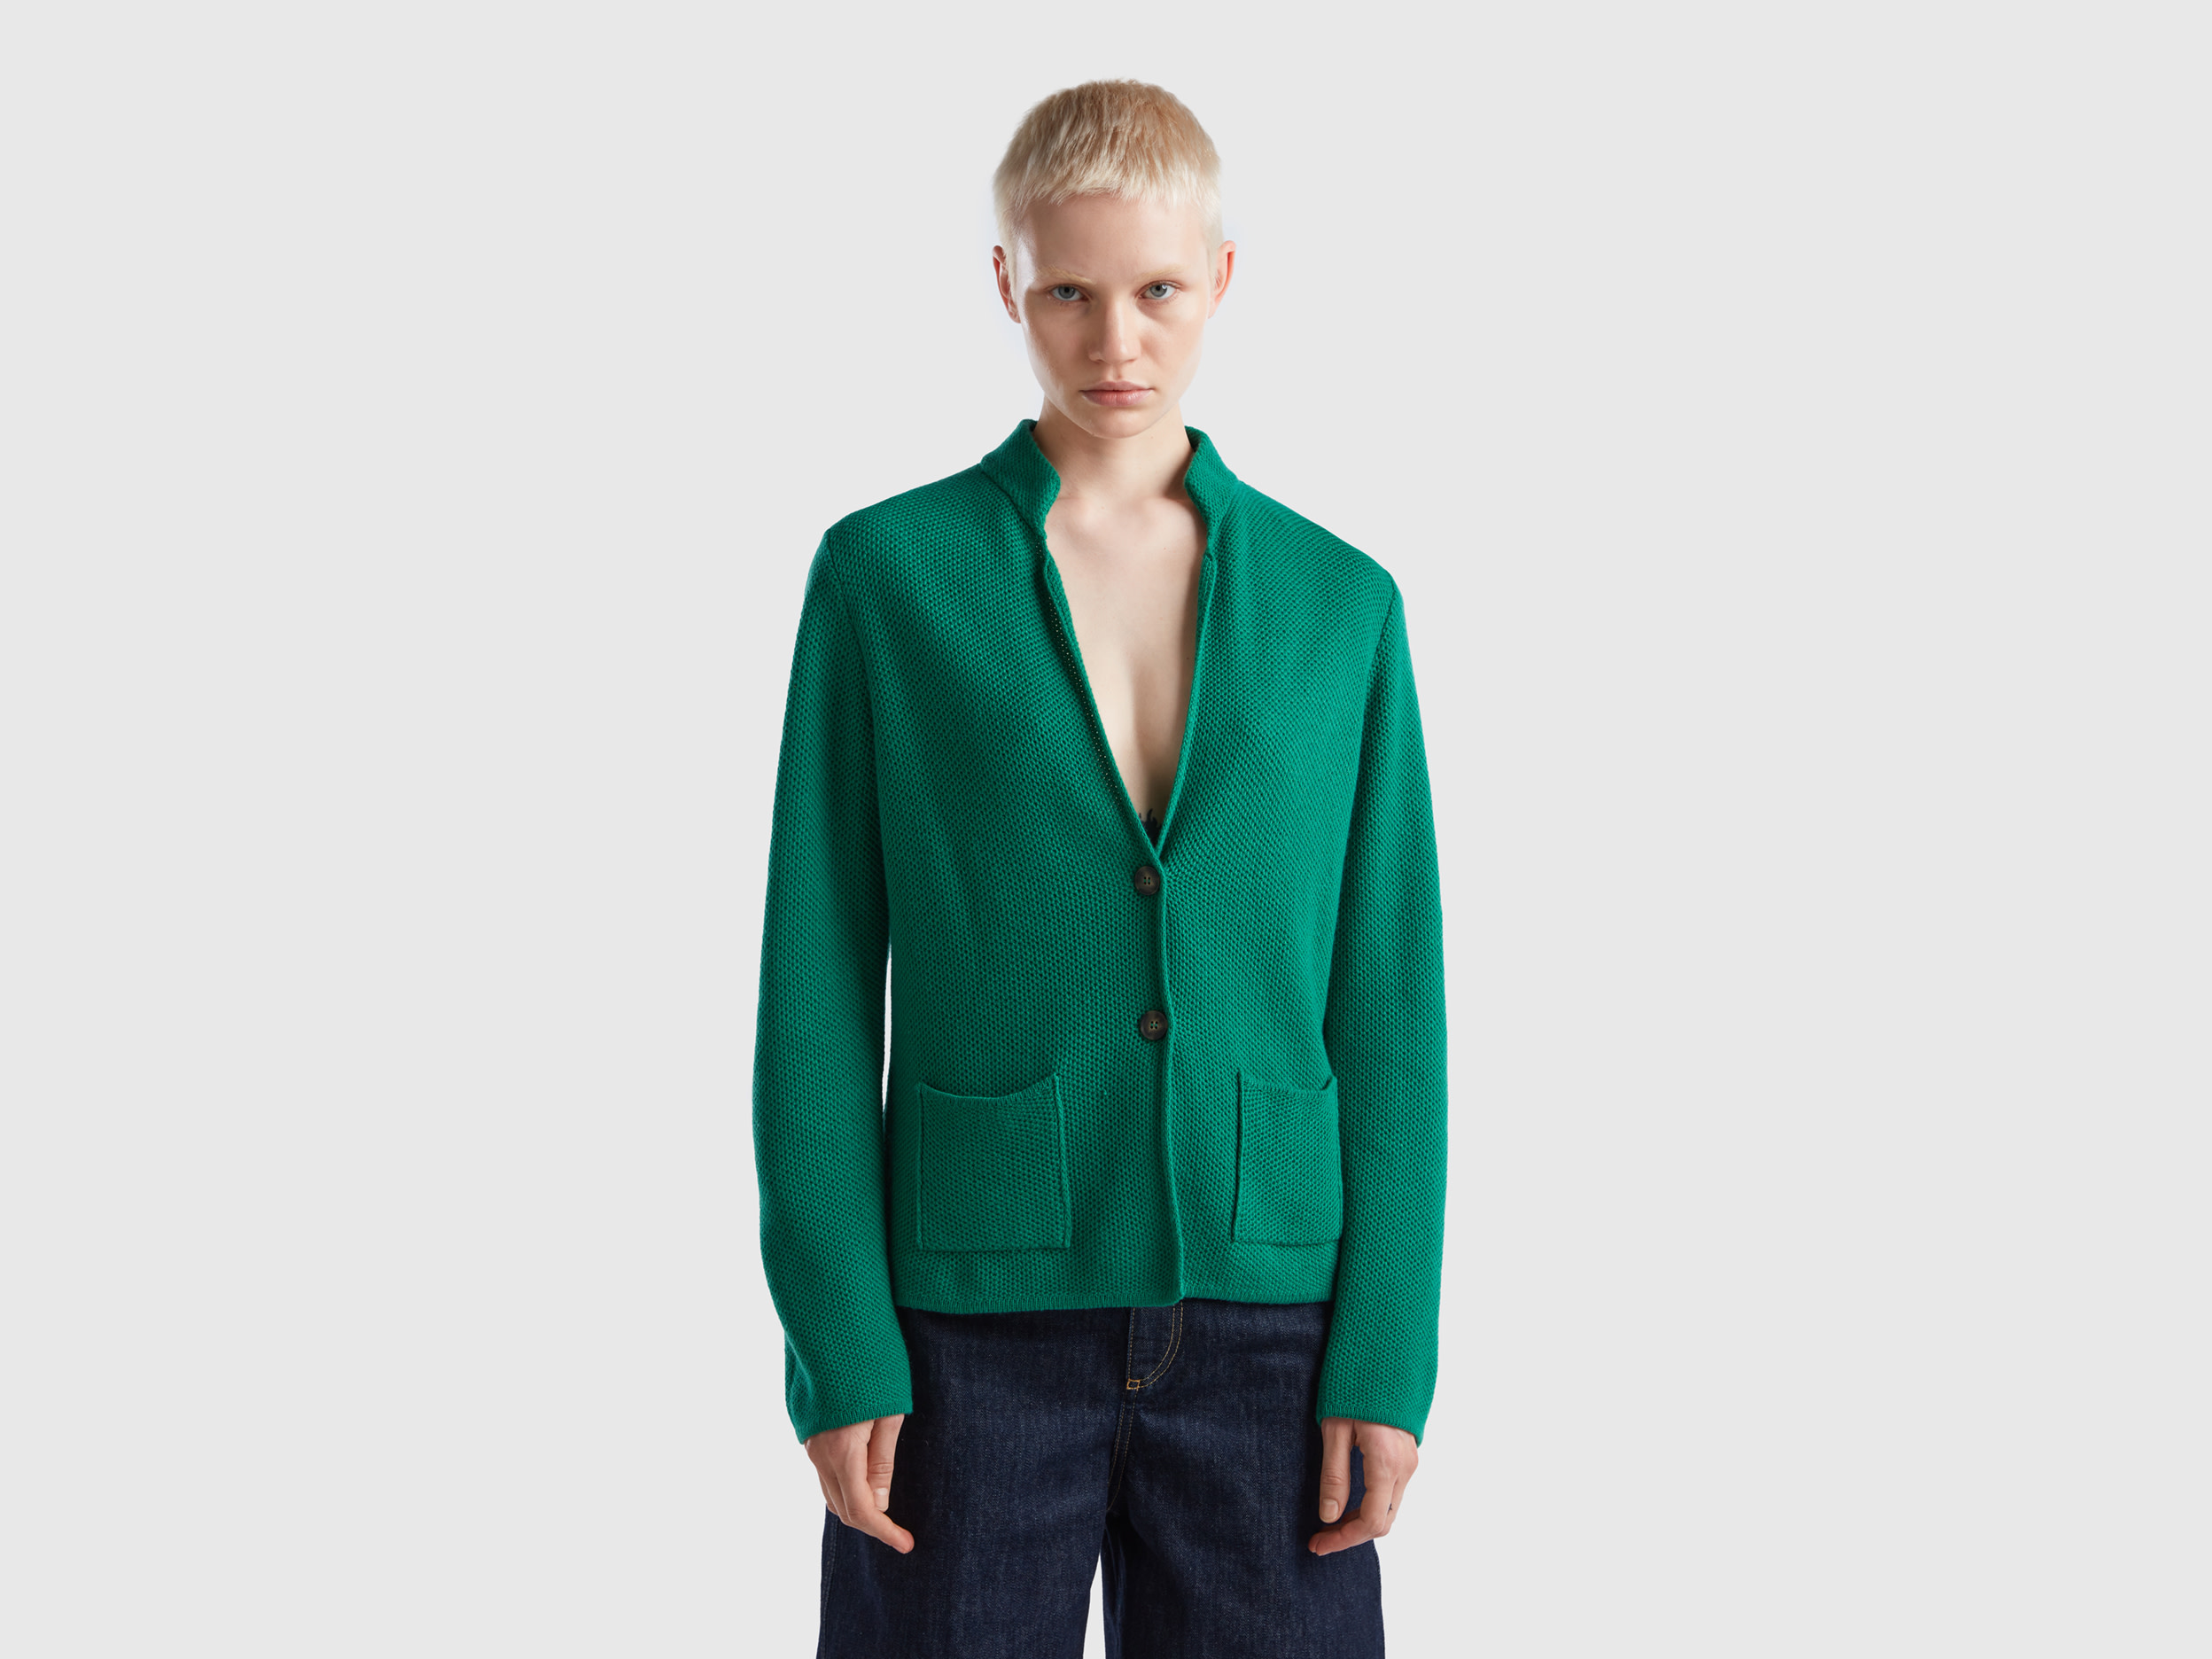 Benetton, Knit Jacket In Wool And Cashmere Blend, size XS, Green, Women